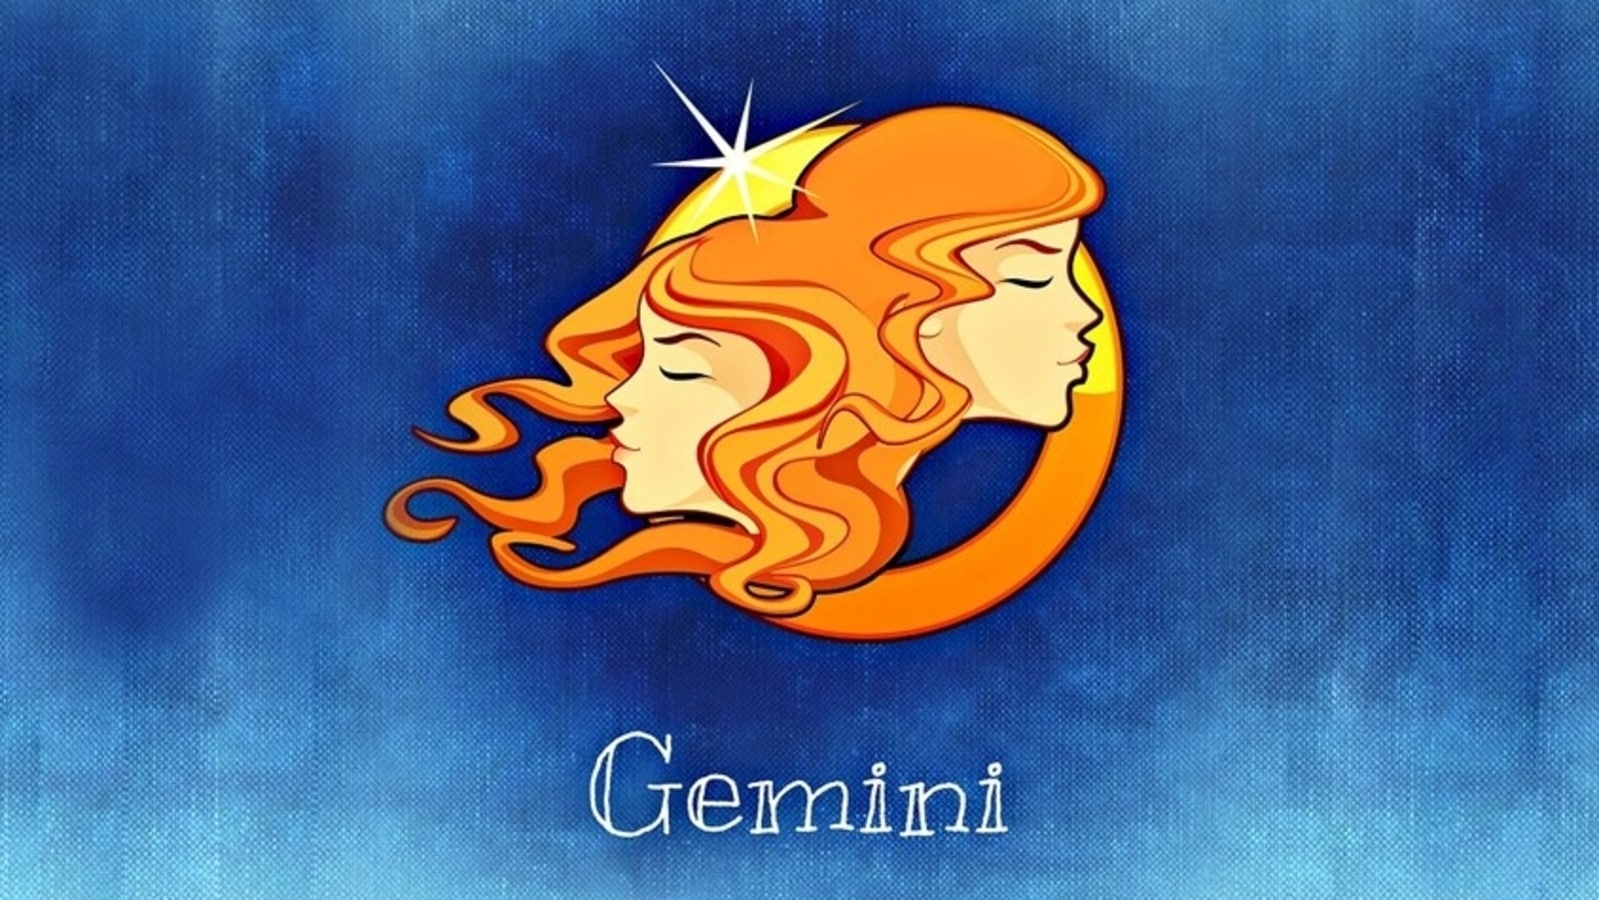 Gemini Daily Horoscope Astrological Prediction for 19th August